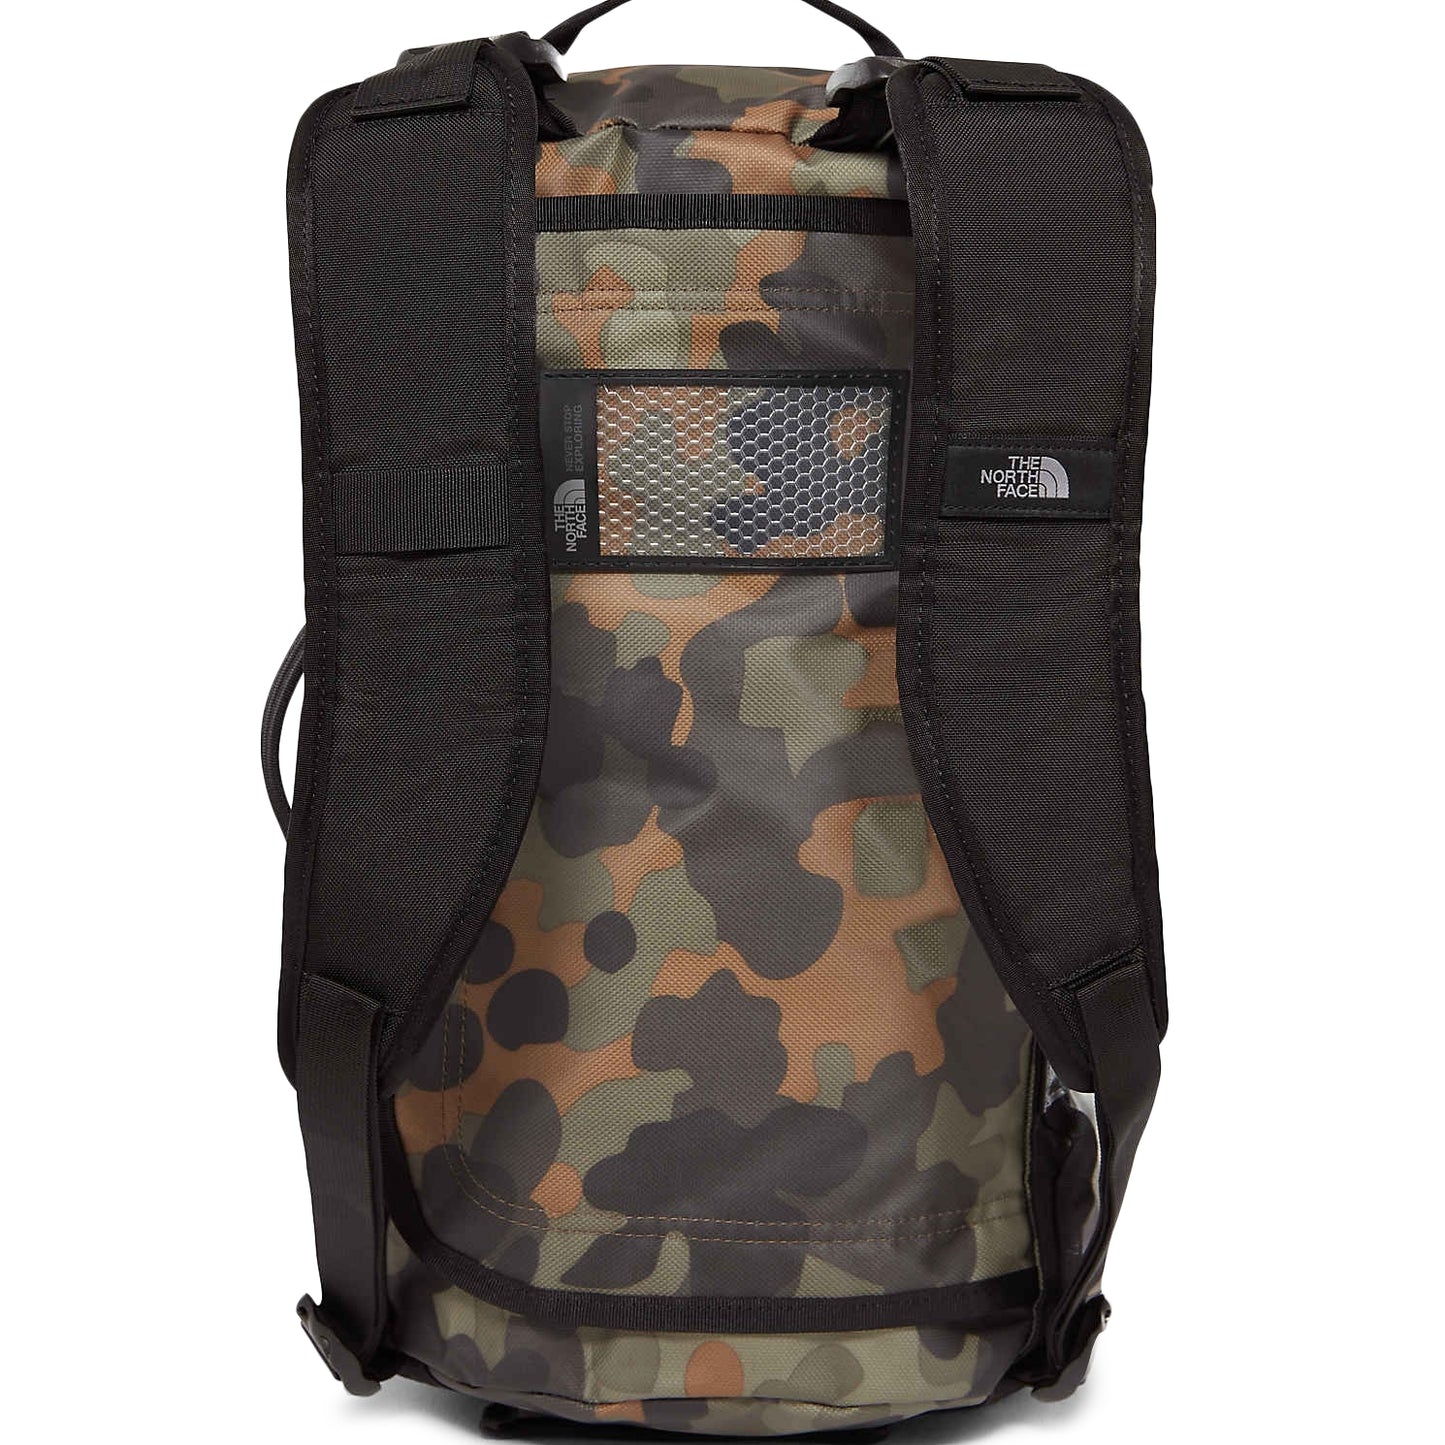 The North Face Base Camp Duffel XS (Camo)  - Allike Store